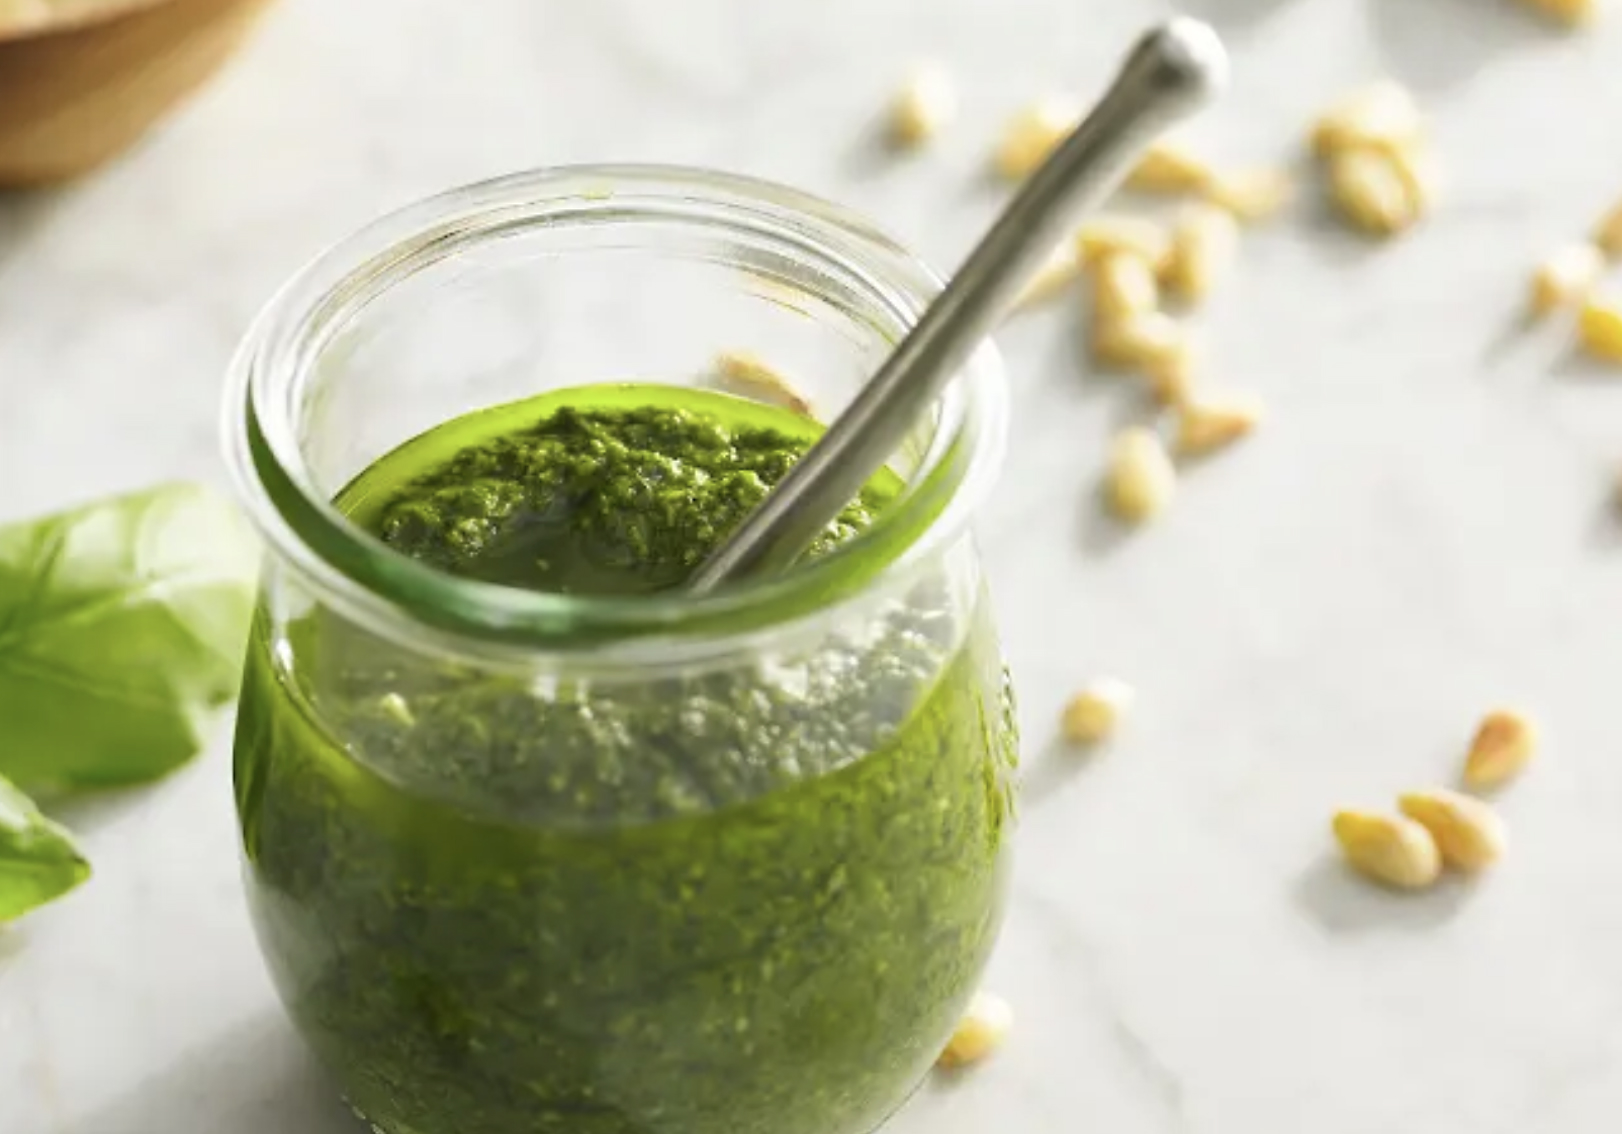 A glass jar filled with pesto